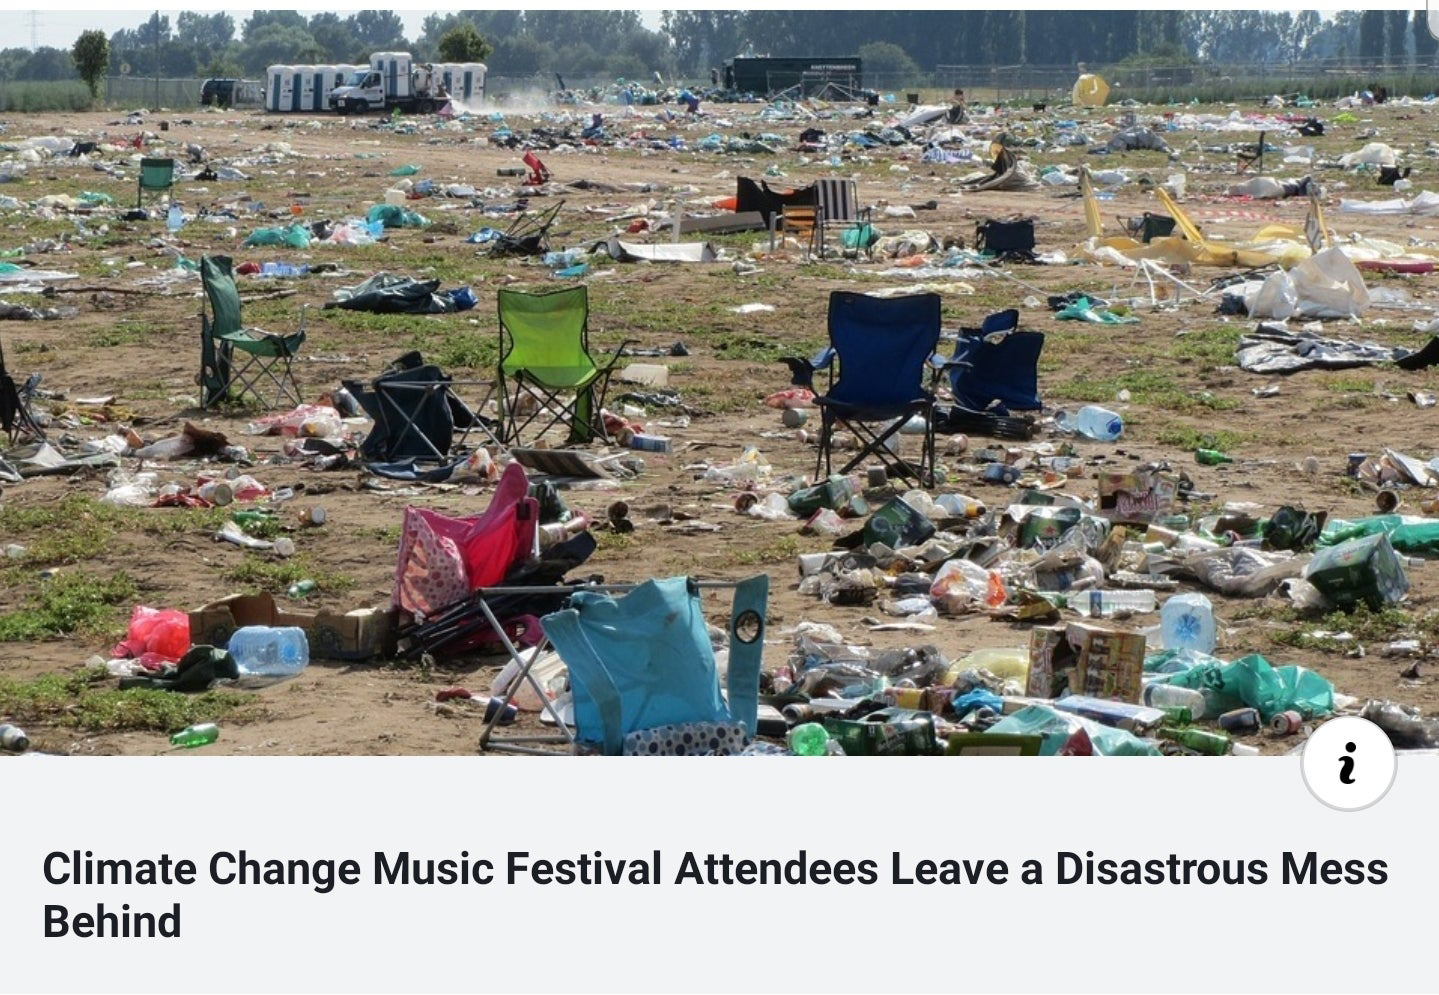 electric picnic rubbish - Climate Change Music Festival Attendees Leave a Disastrous Mess Behind